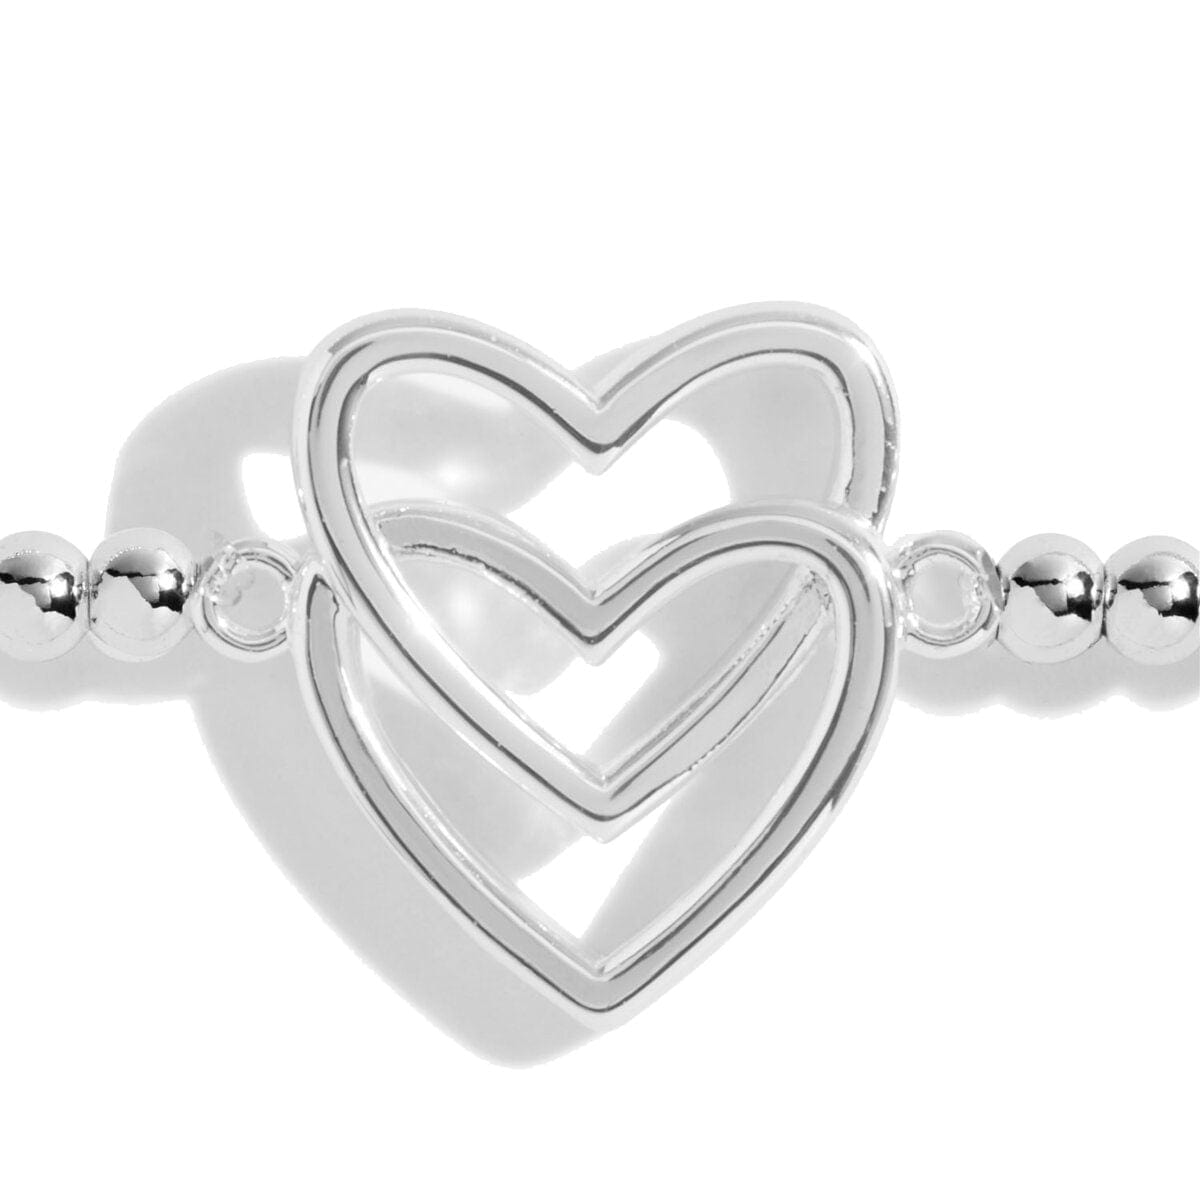 Joma Jewellery Bracelet Joma Jewellery Bracelet - A Little Happy Birthday (Linked Hearts)